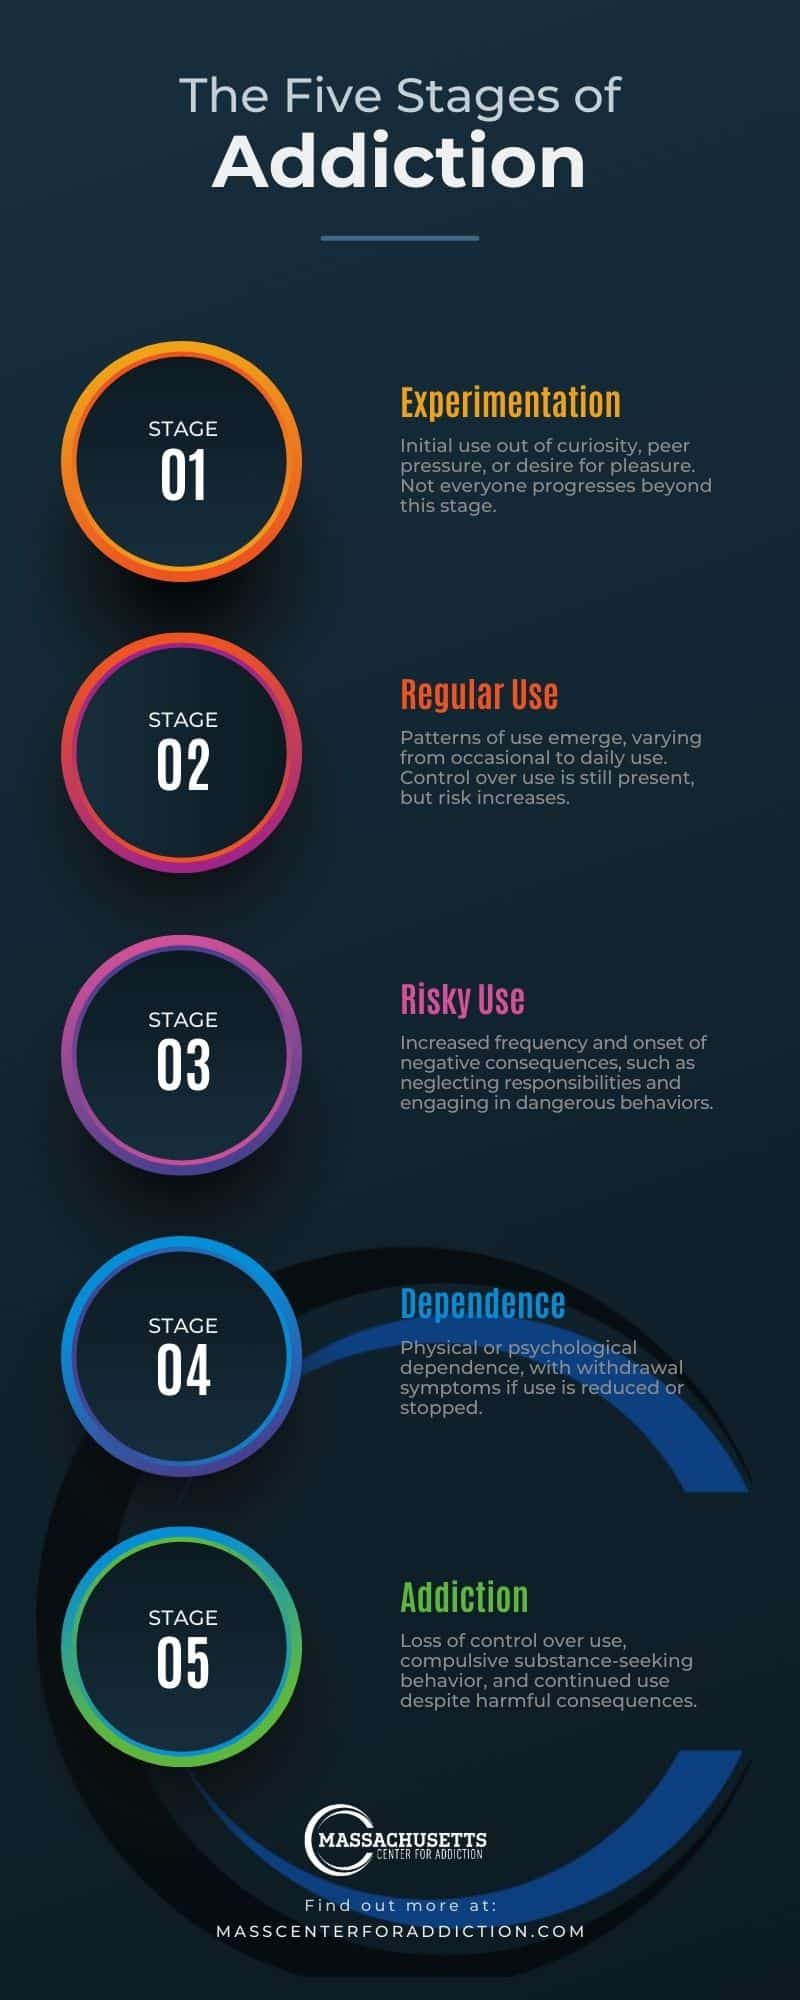 Stages of Addiction Infographic detailing the five stages of addiction: experimentation, regular use, risky use, dependence, and addiction.